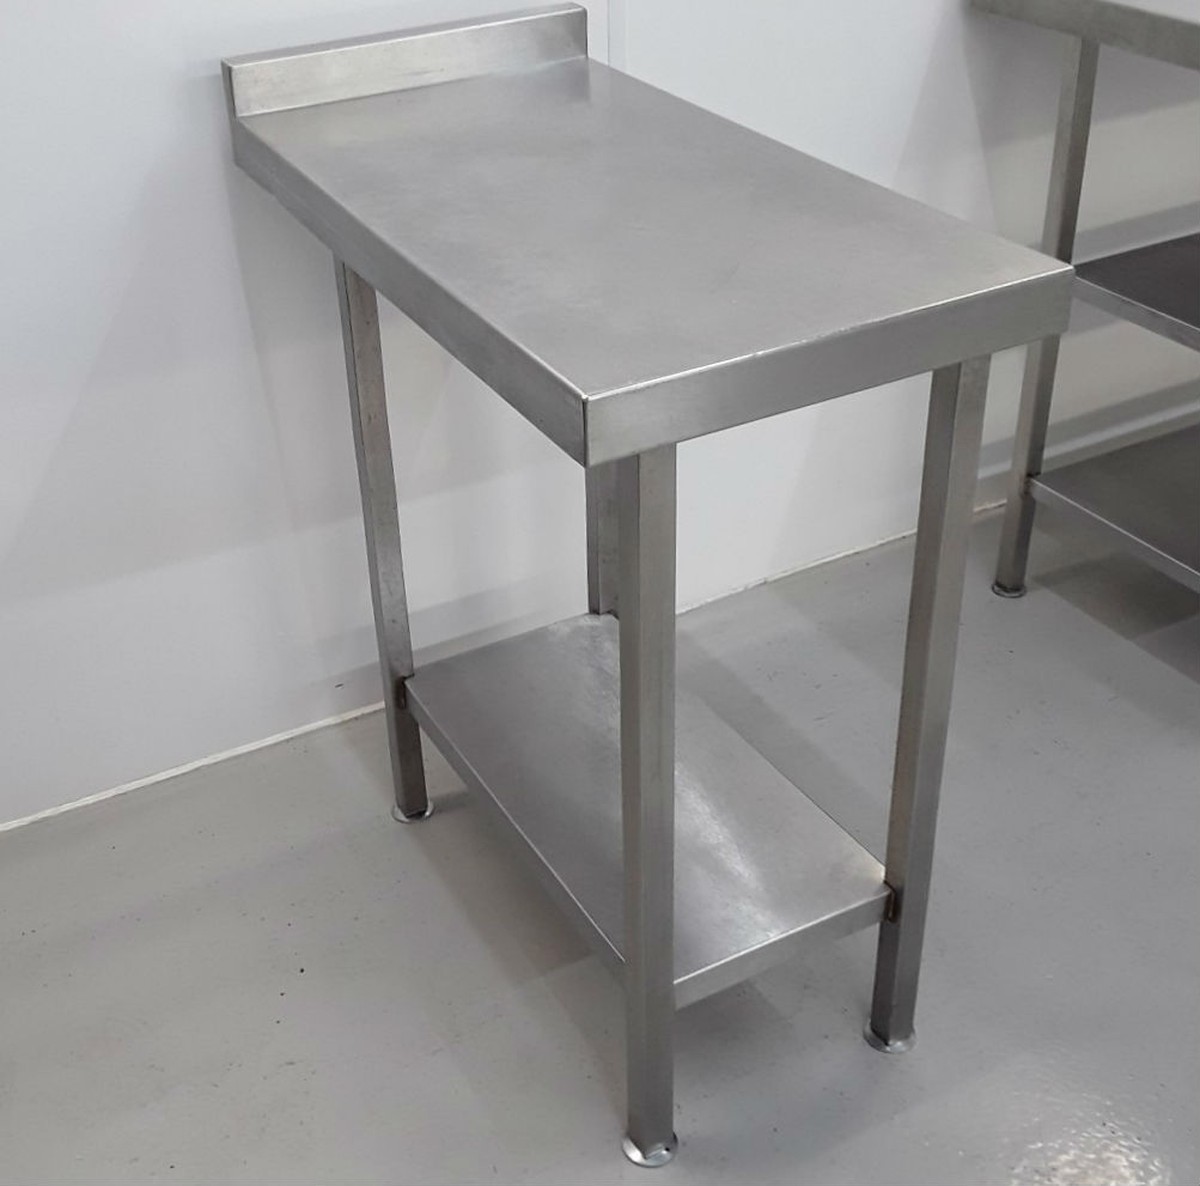 Stainless Steel Table Price - Rotary Table - Packing Tables by ...